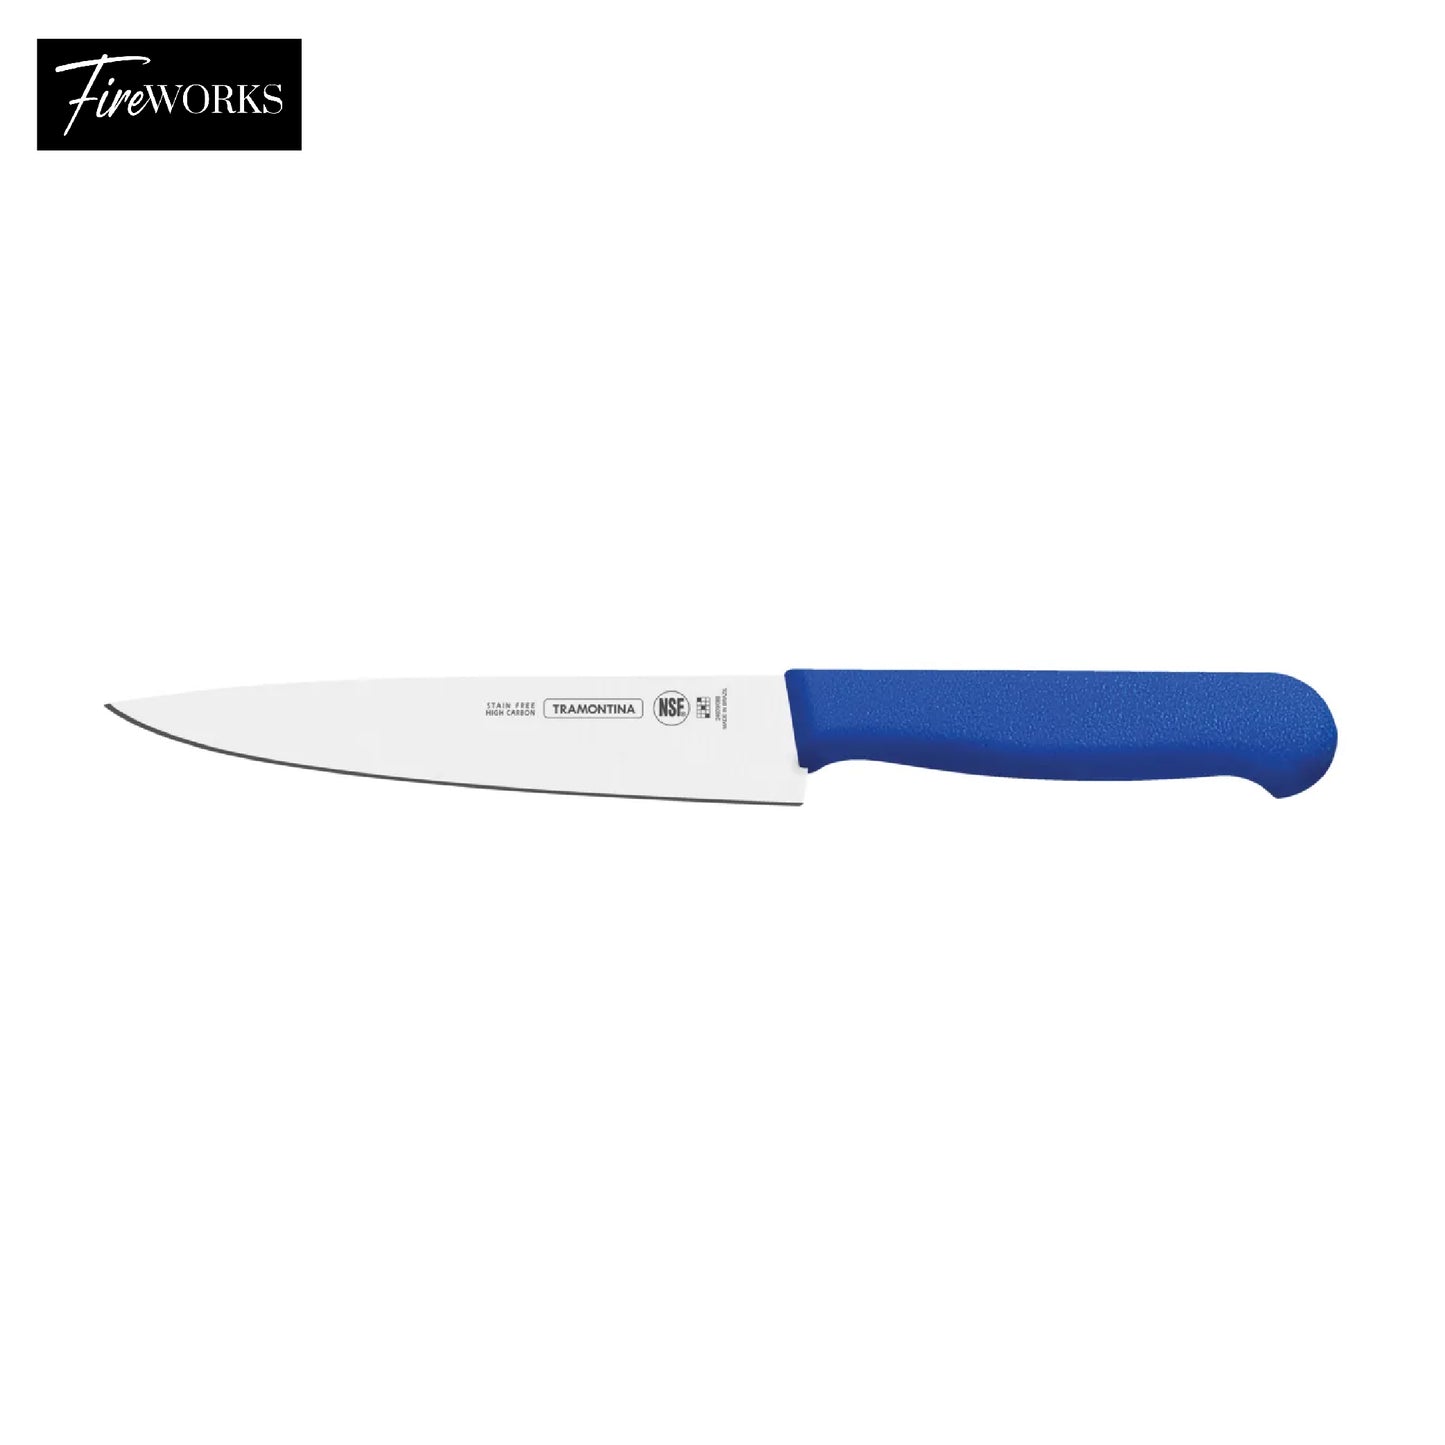 Tramontina Meat Knife 10 Inches Blue Colour - 246200110